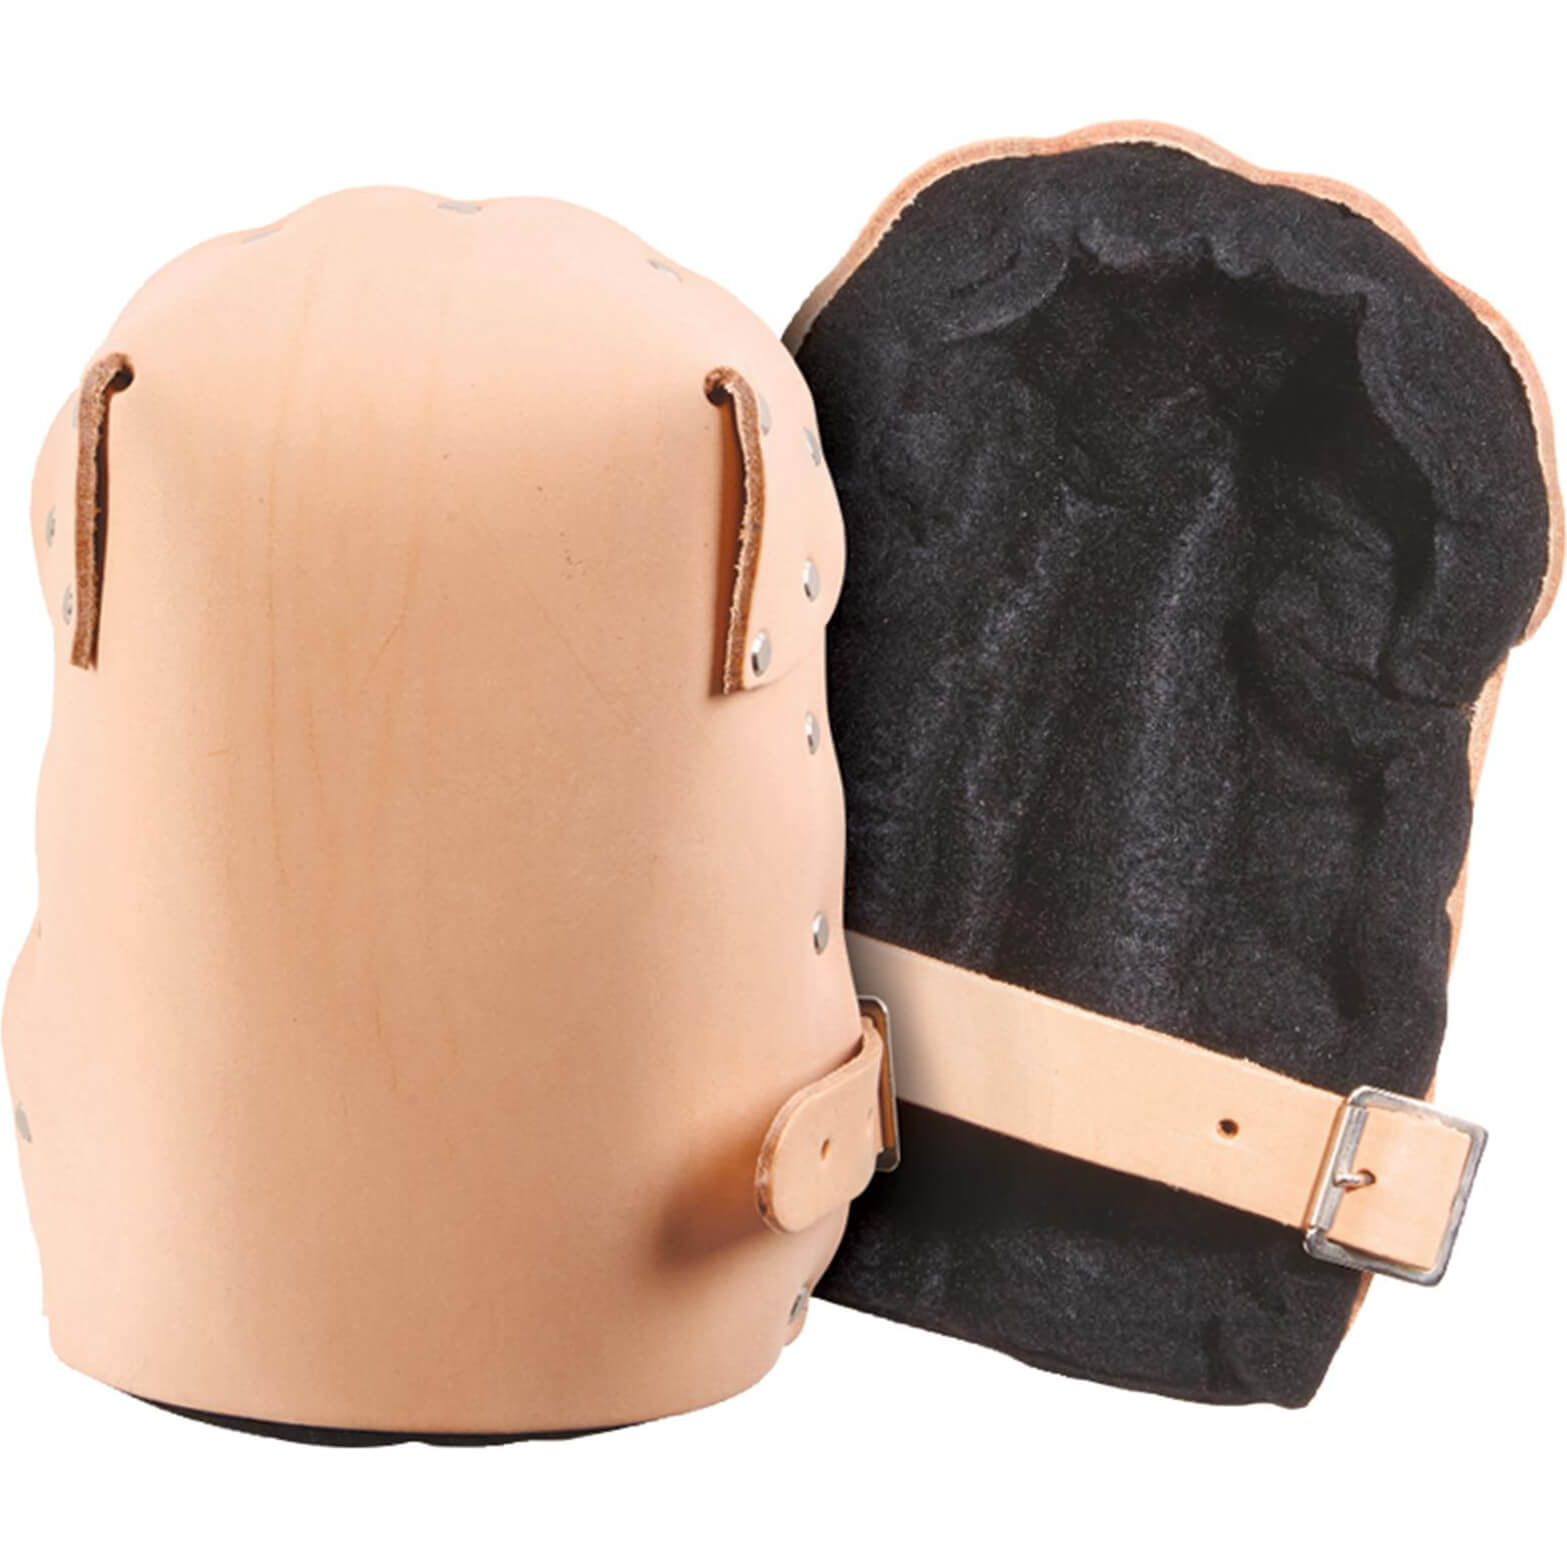 Image of Kunys Heavy Duty Leather Thick Felt Knee Pads